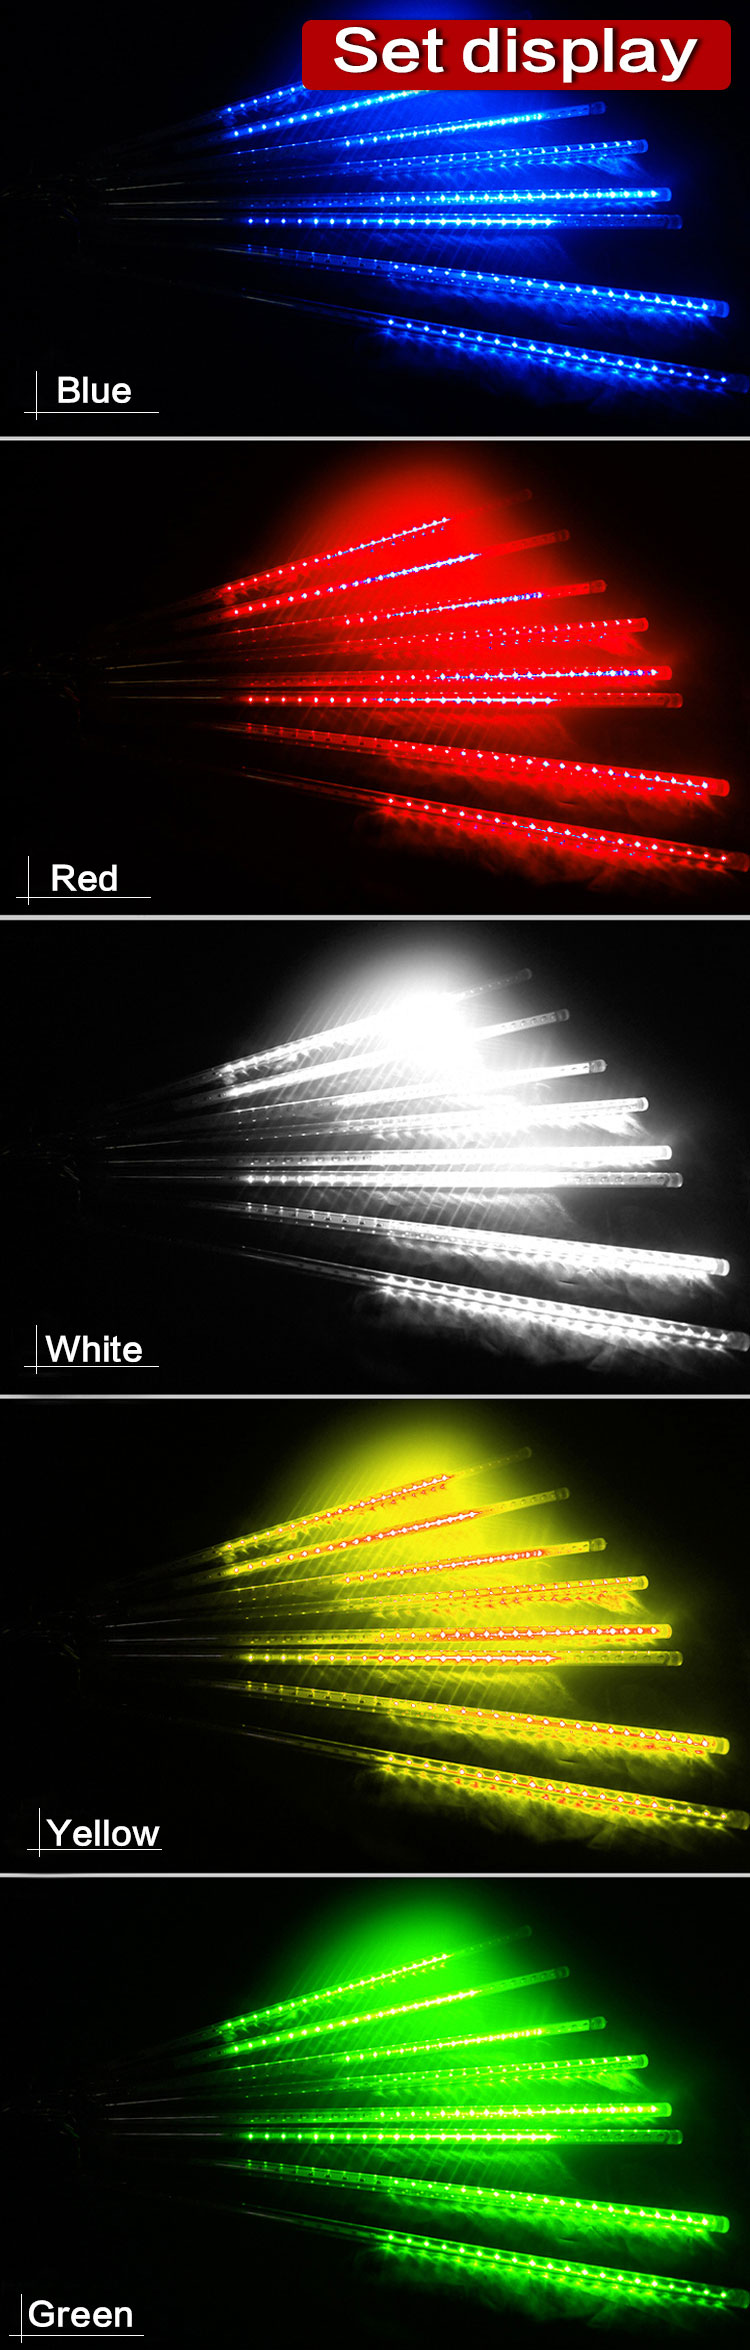 LED Meteor Shower Lights Waterproof 8 Tubes String For Xmas Party